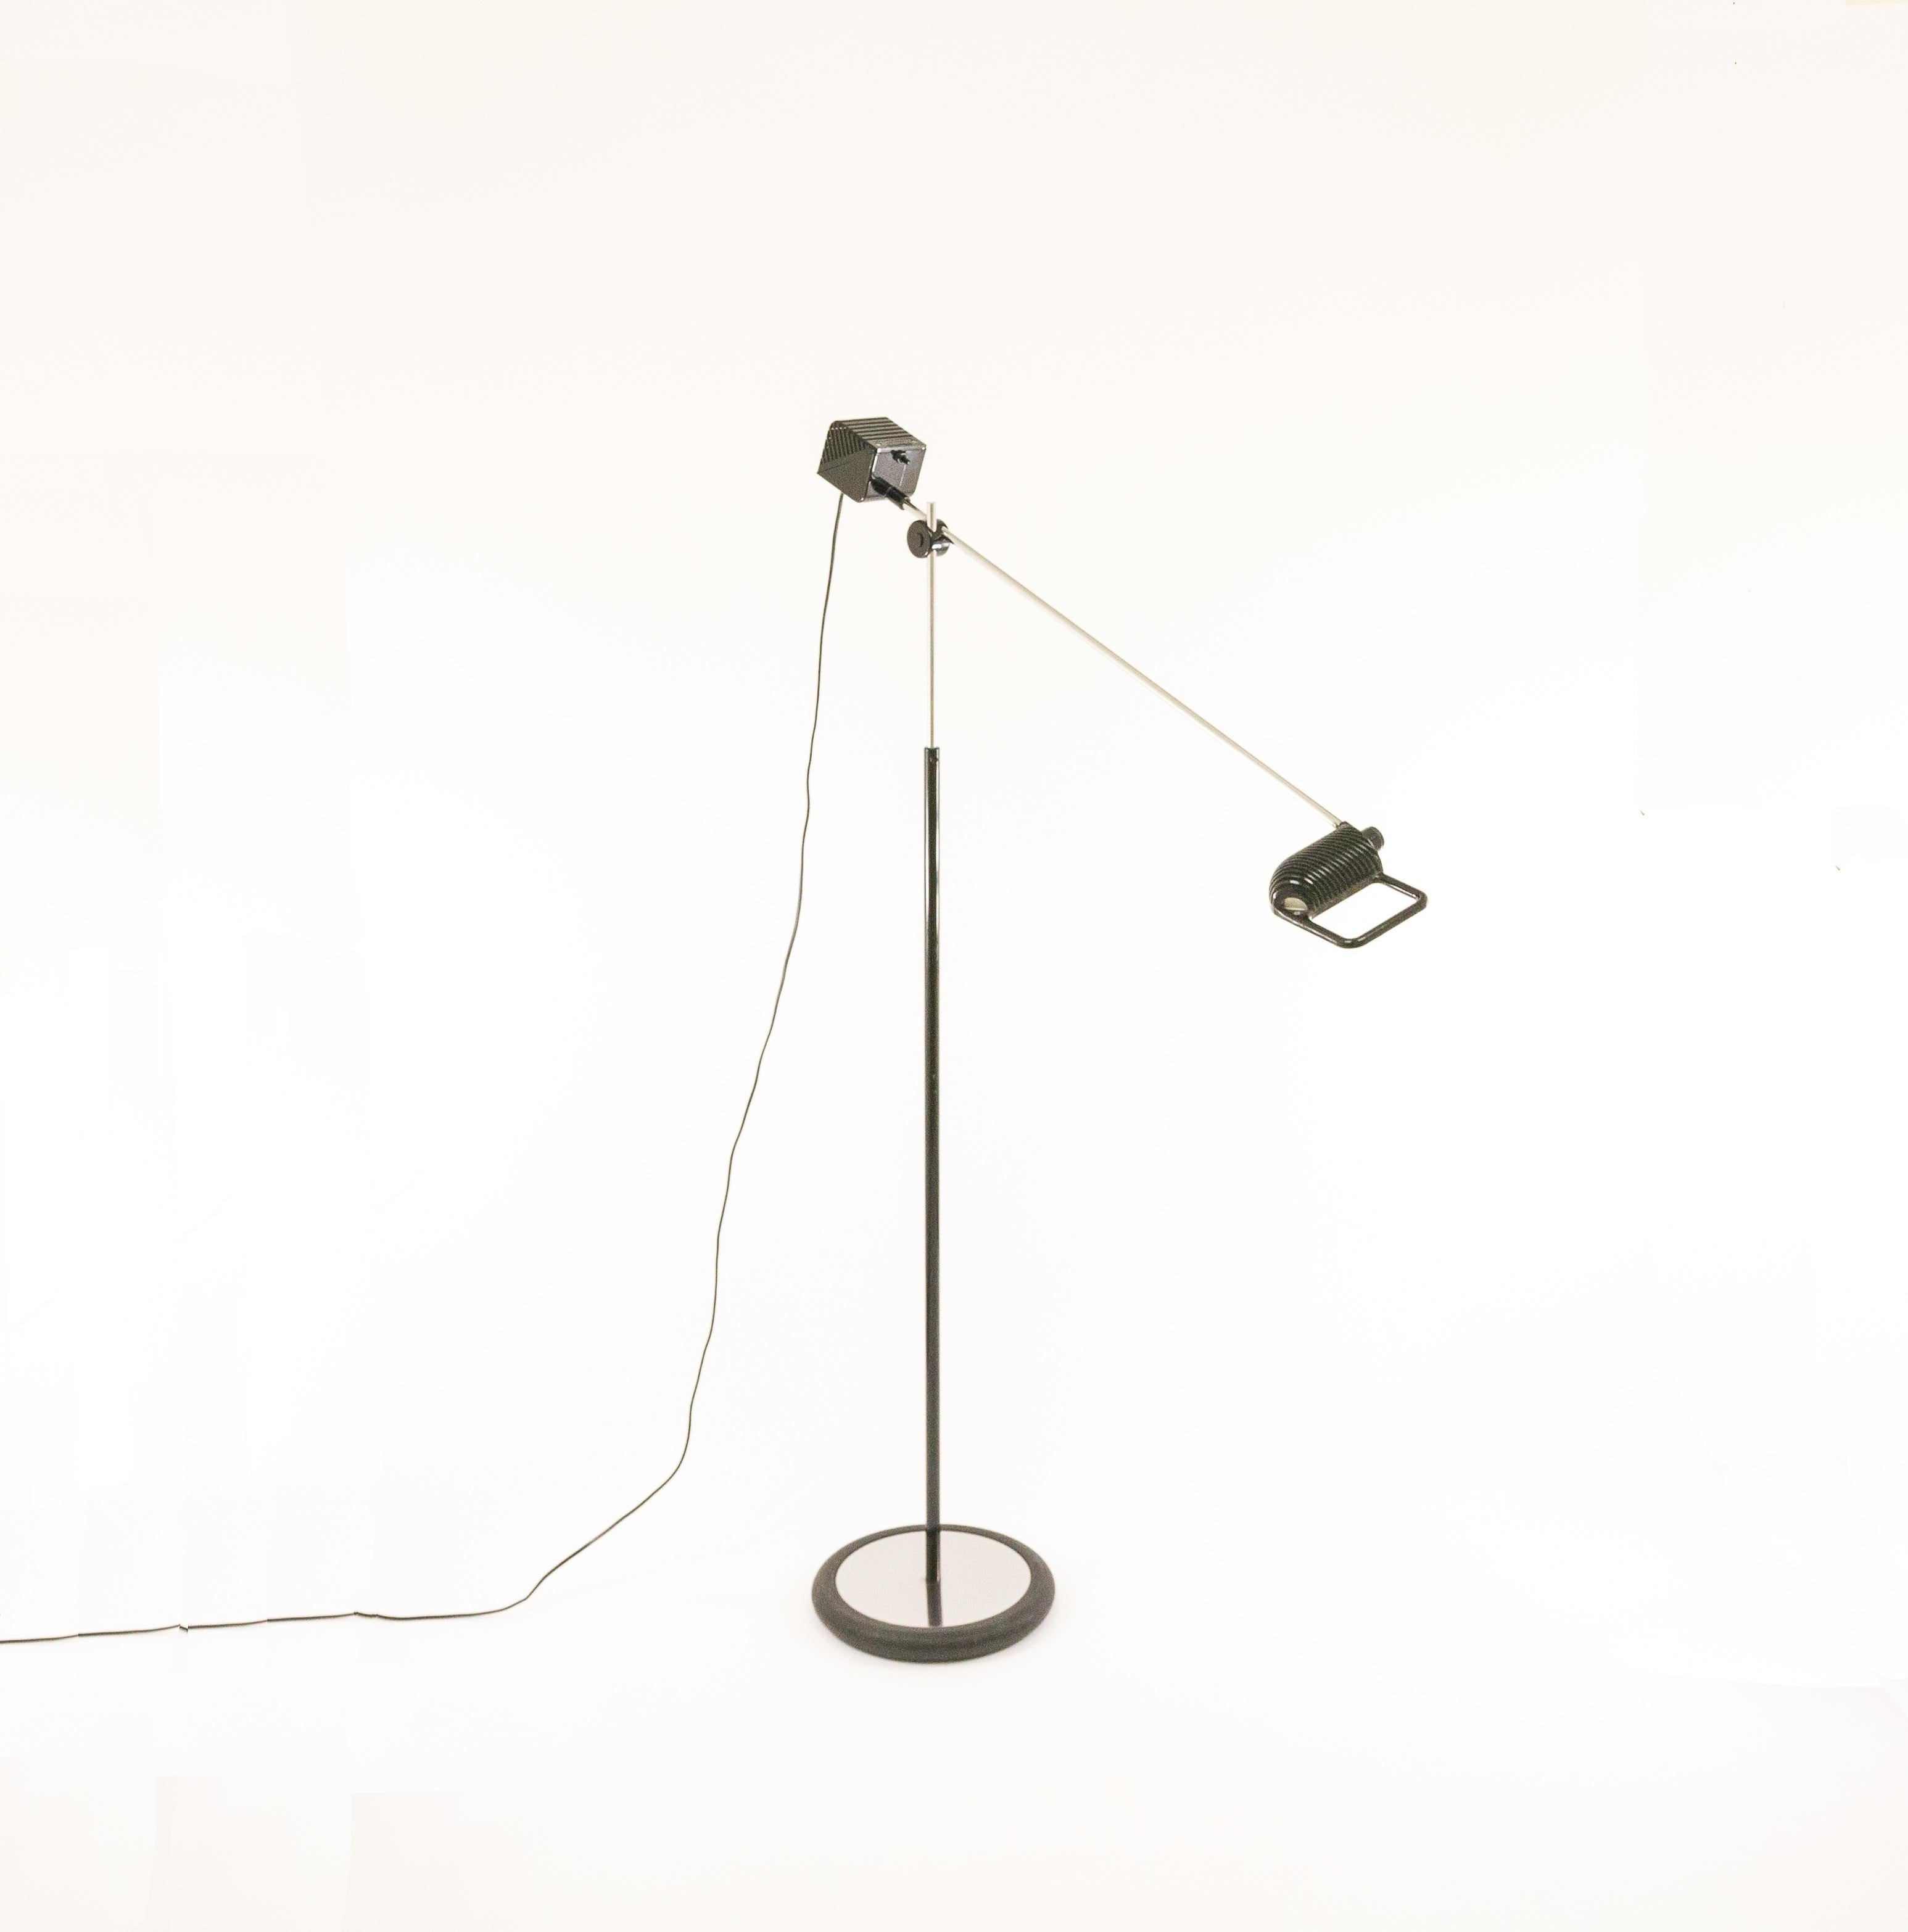 Mid-Century Modern Pair of Maniglia Floor Lamps by De Pas, D'Urbino and Lomazzi for Stilnovo, 1970s For Sale